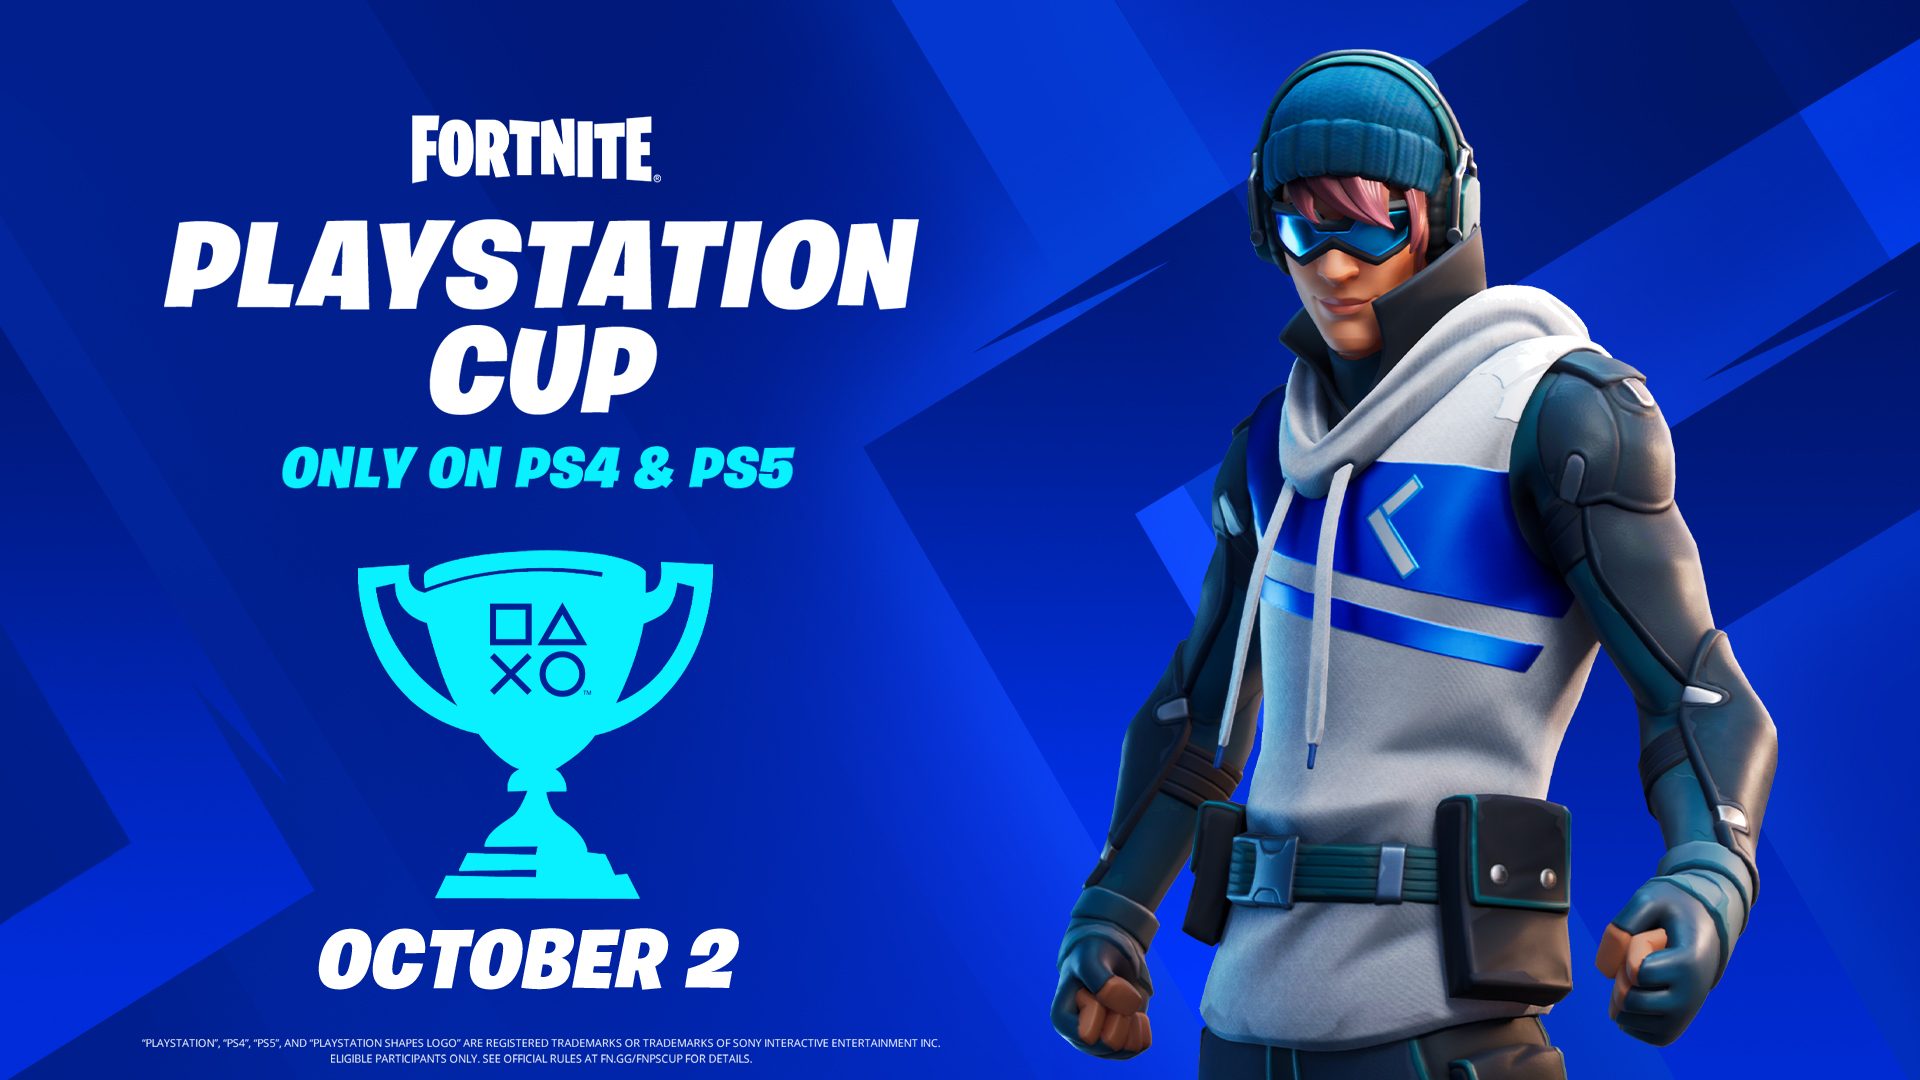 Compete in the Fortnite PlayStation Cup for a piece of the 110,000